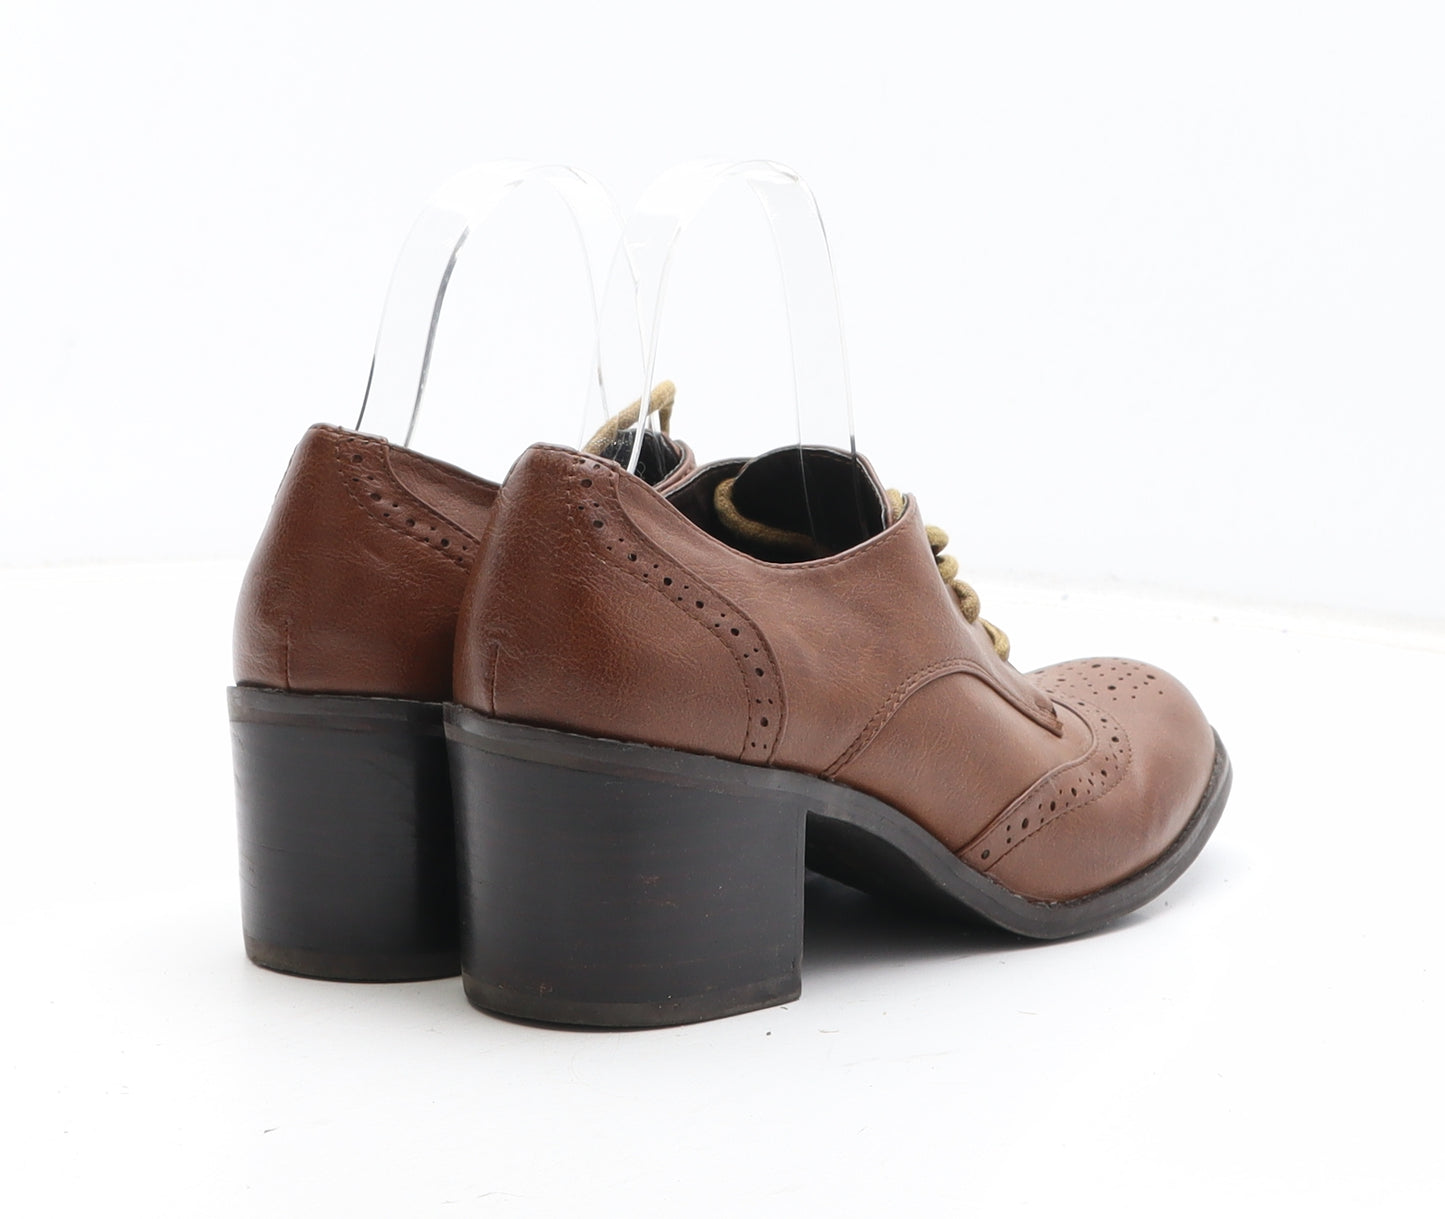 OFFICE Womens Brown Synthetic Slip On Boot UK - Brogue Style